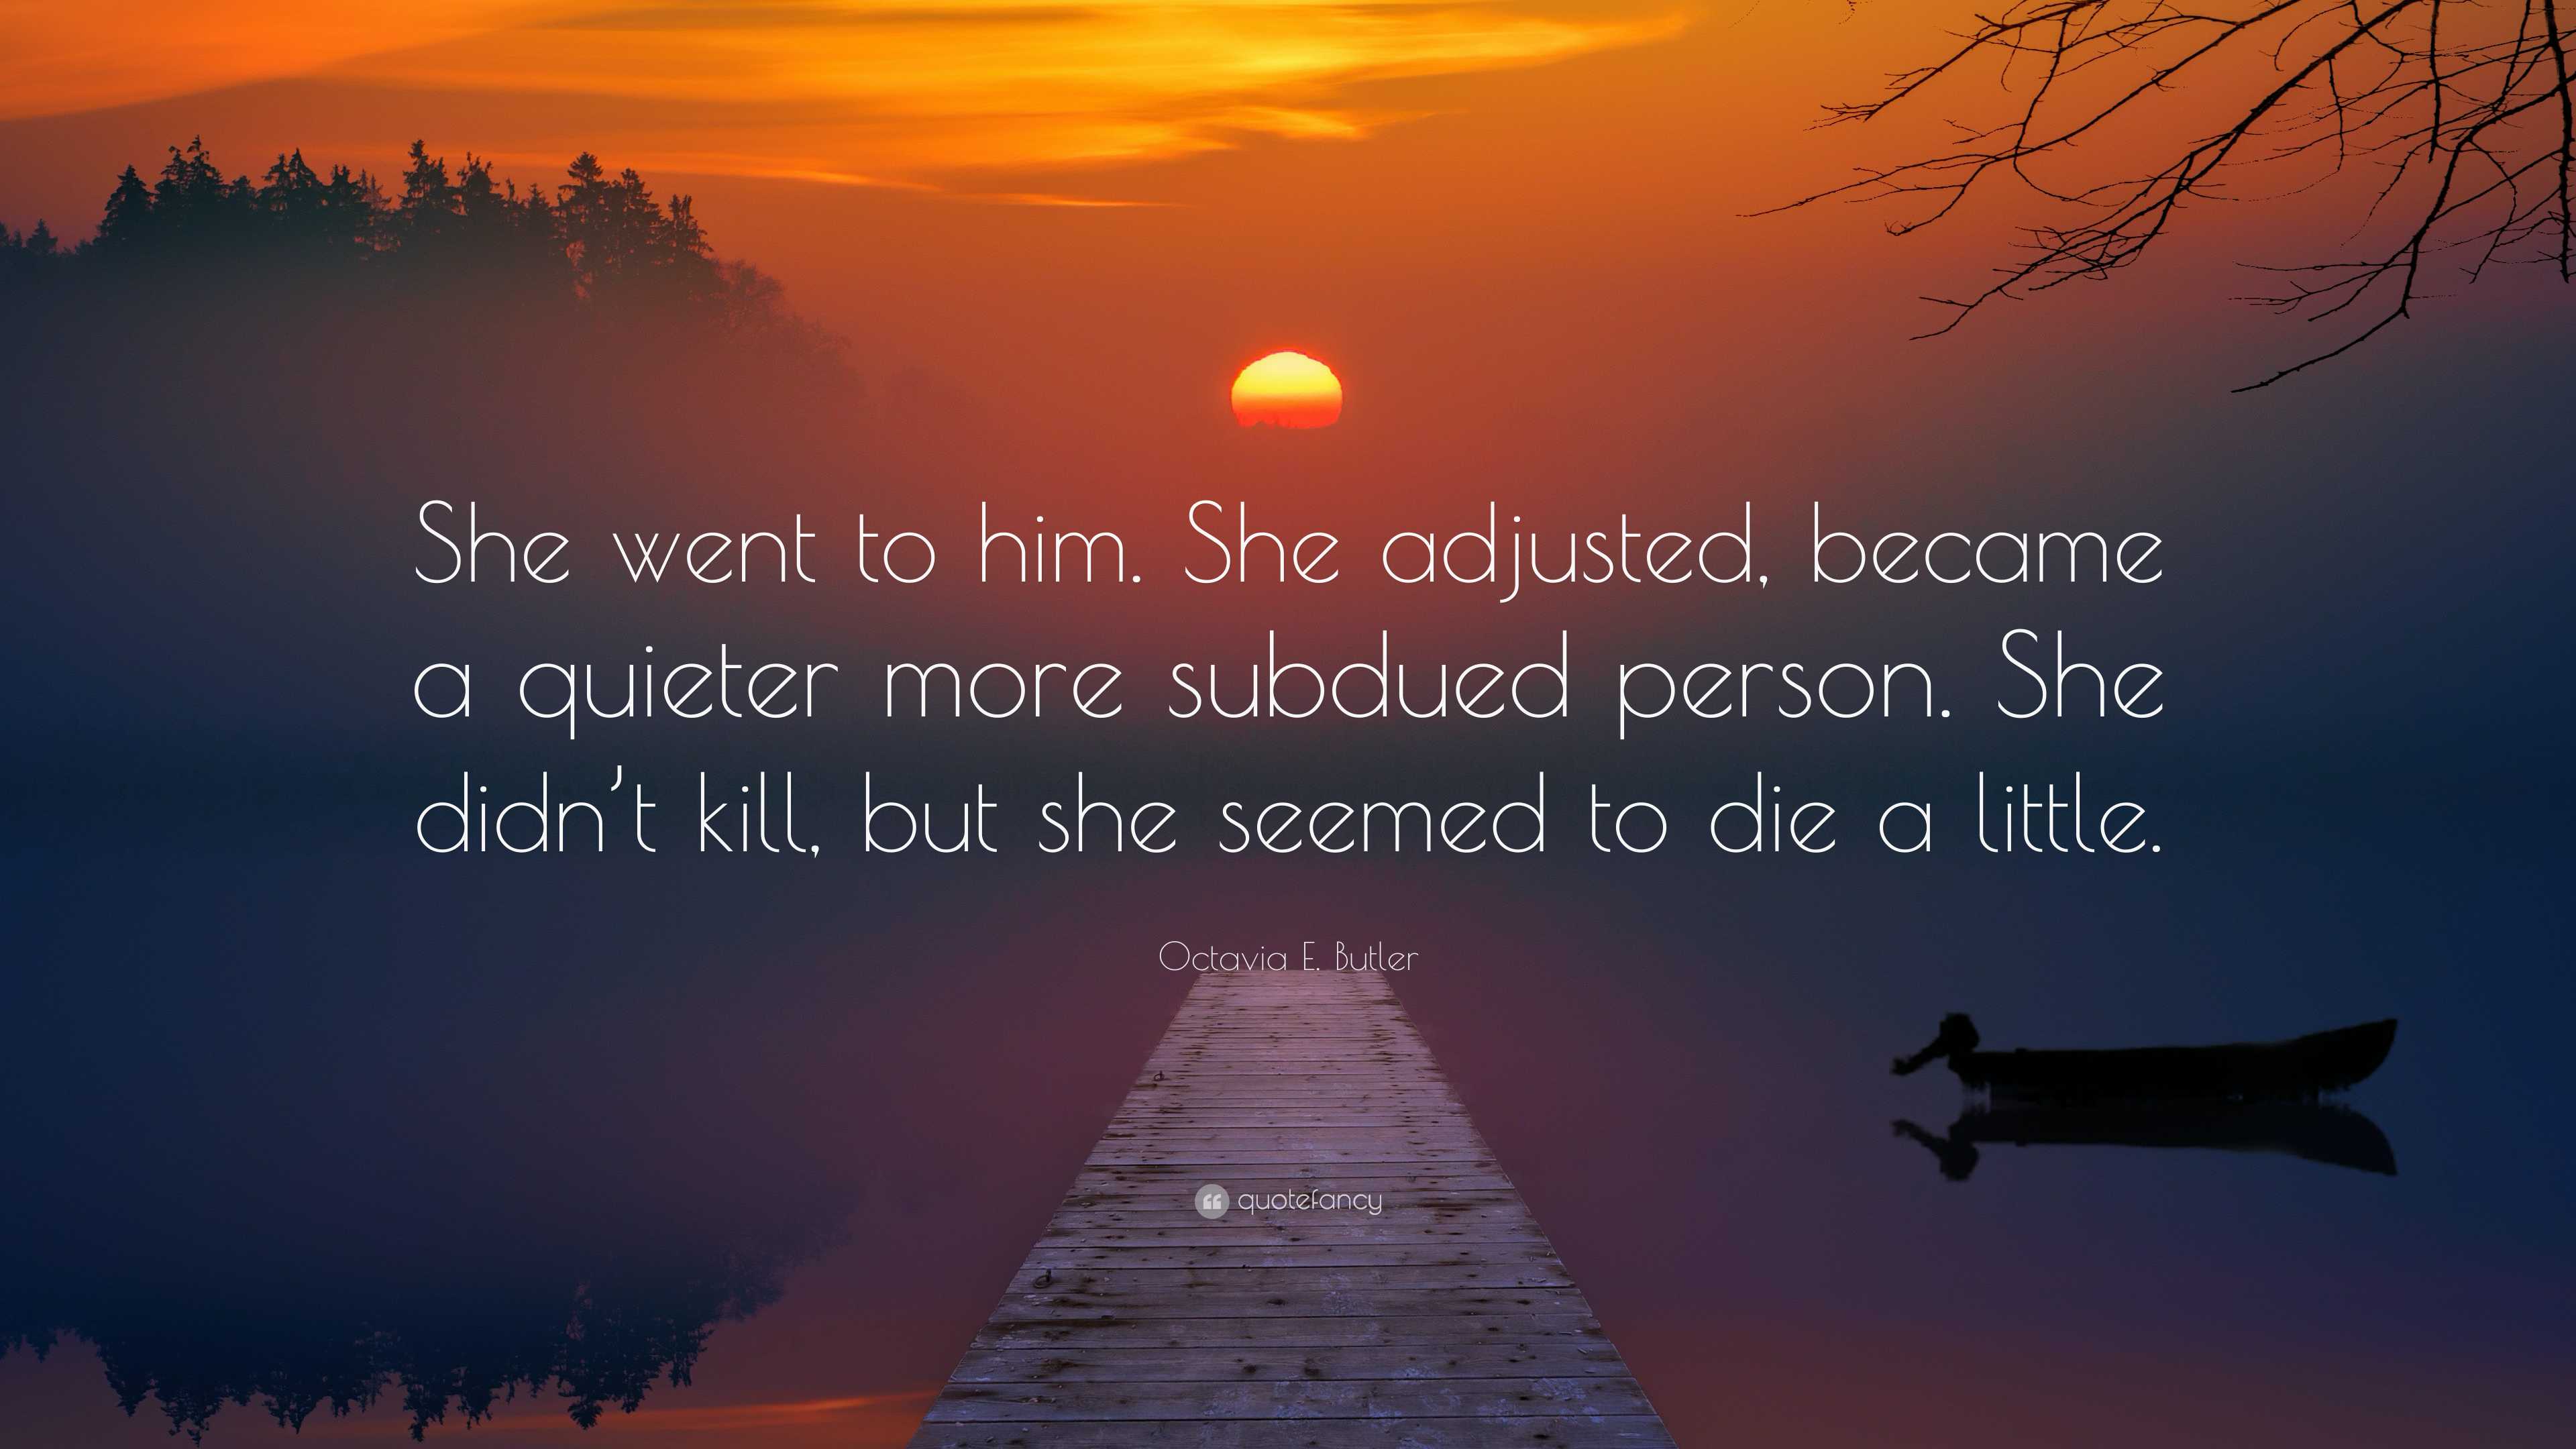 Octavia E. Butler Quote: “She went to him. She adjusted, became a ...